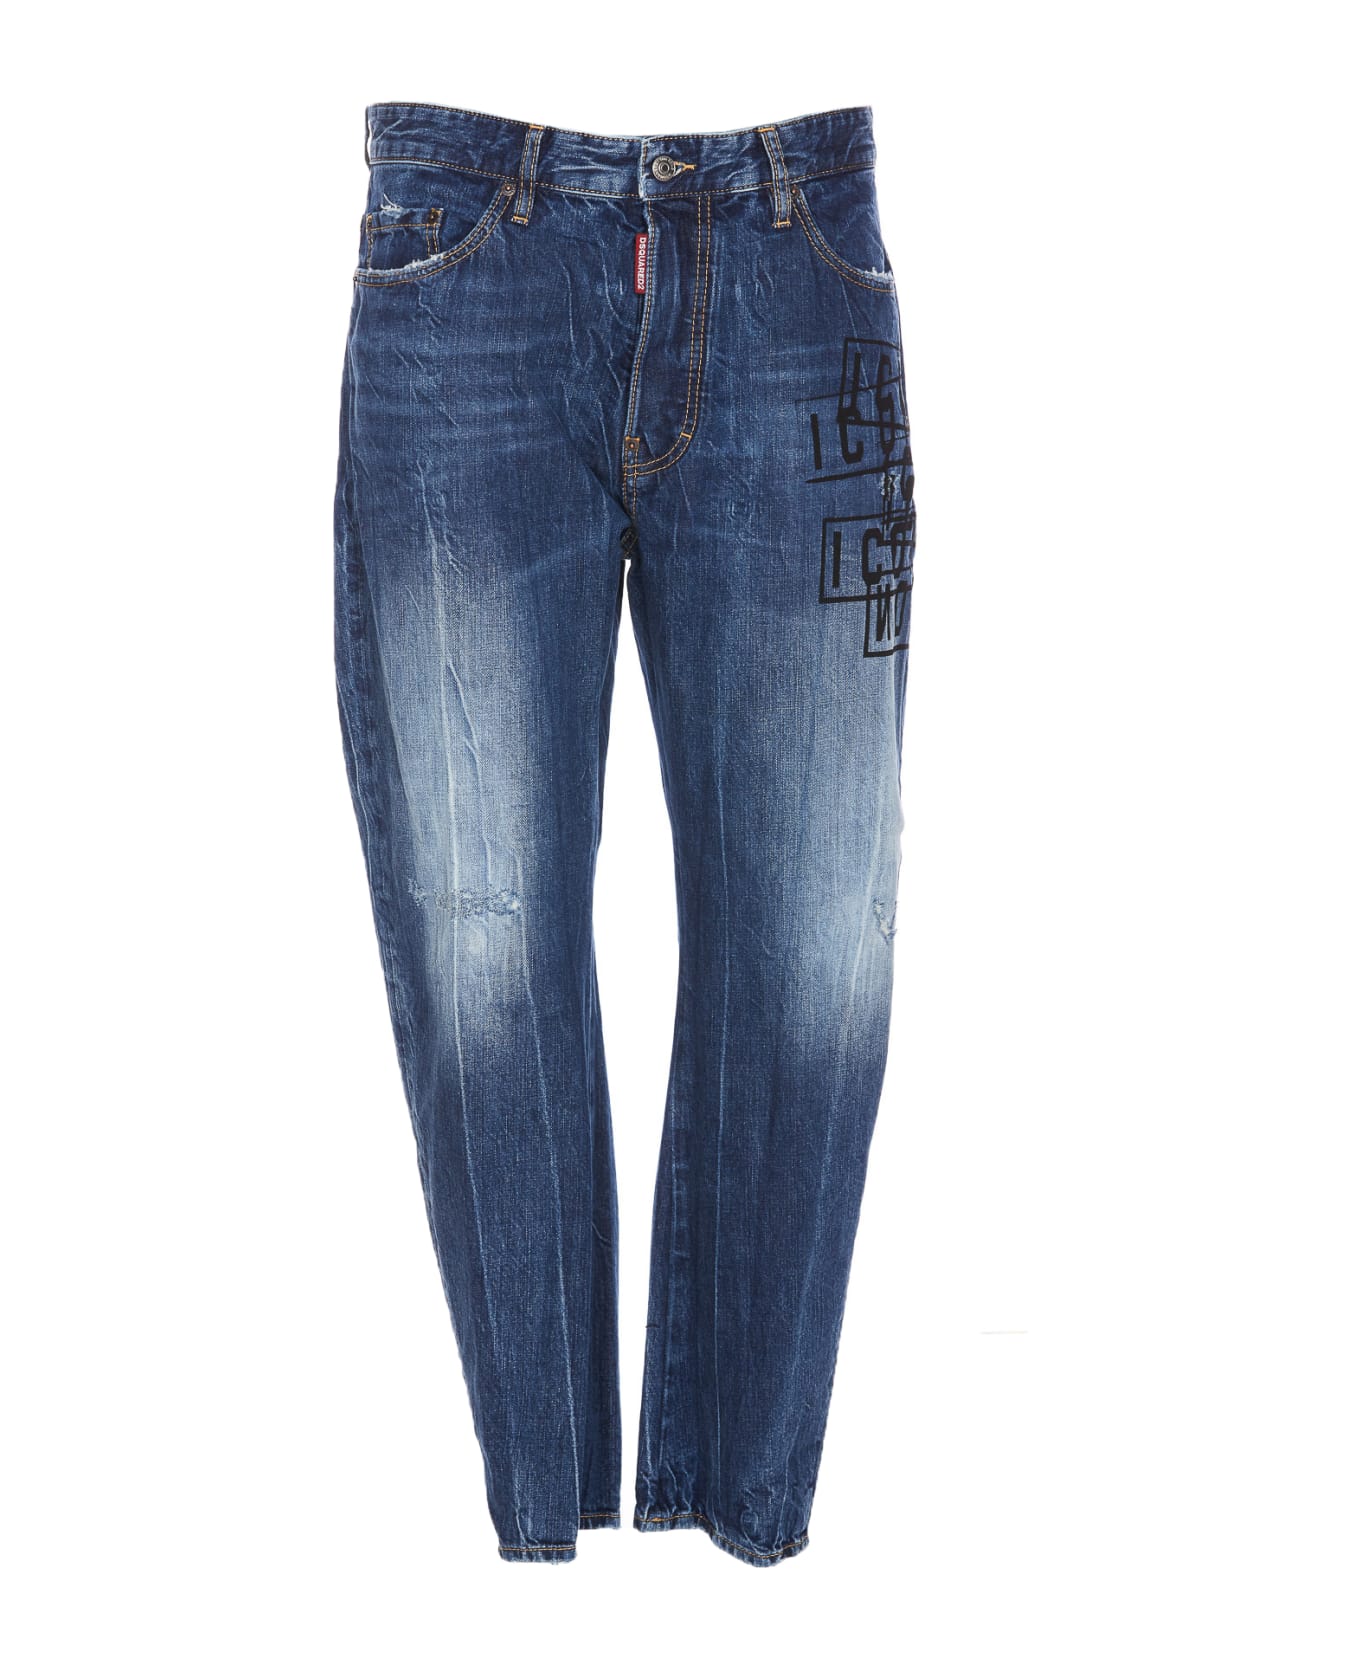 Dsquared2 Bro Jeans - Blue ボトムス